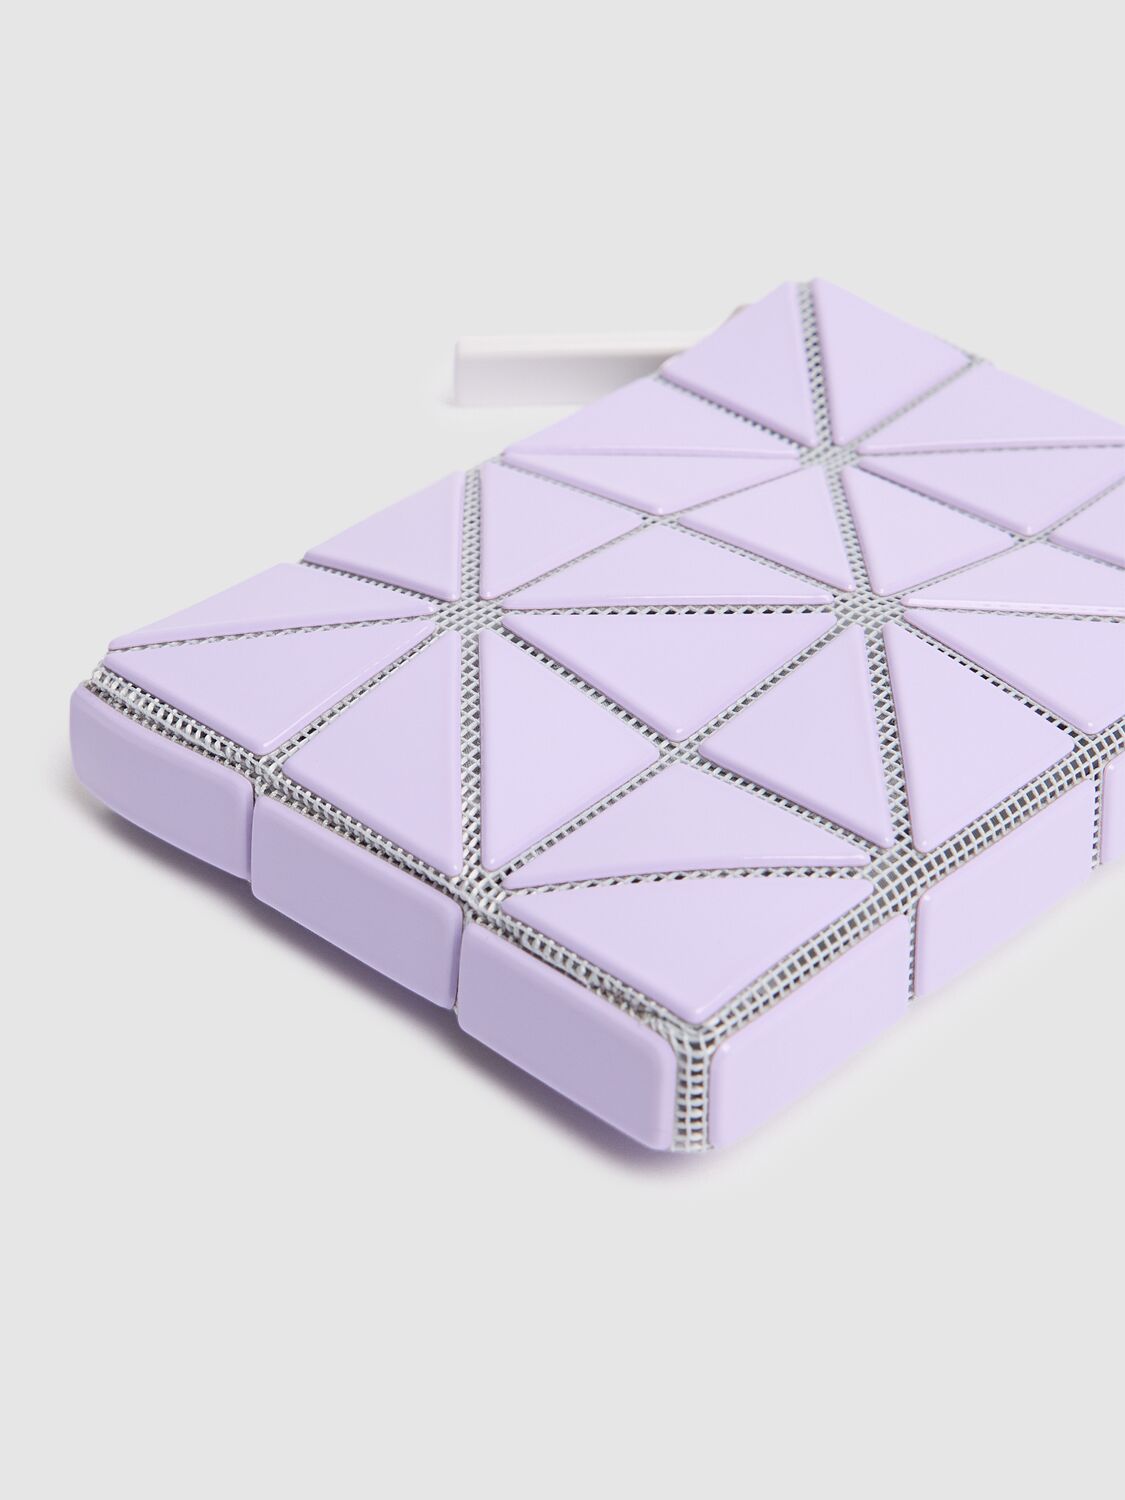 Shop Bao Bao Issey Miyake Cassette Coin Wallet In Lavender